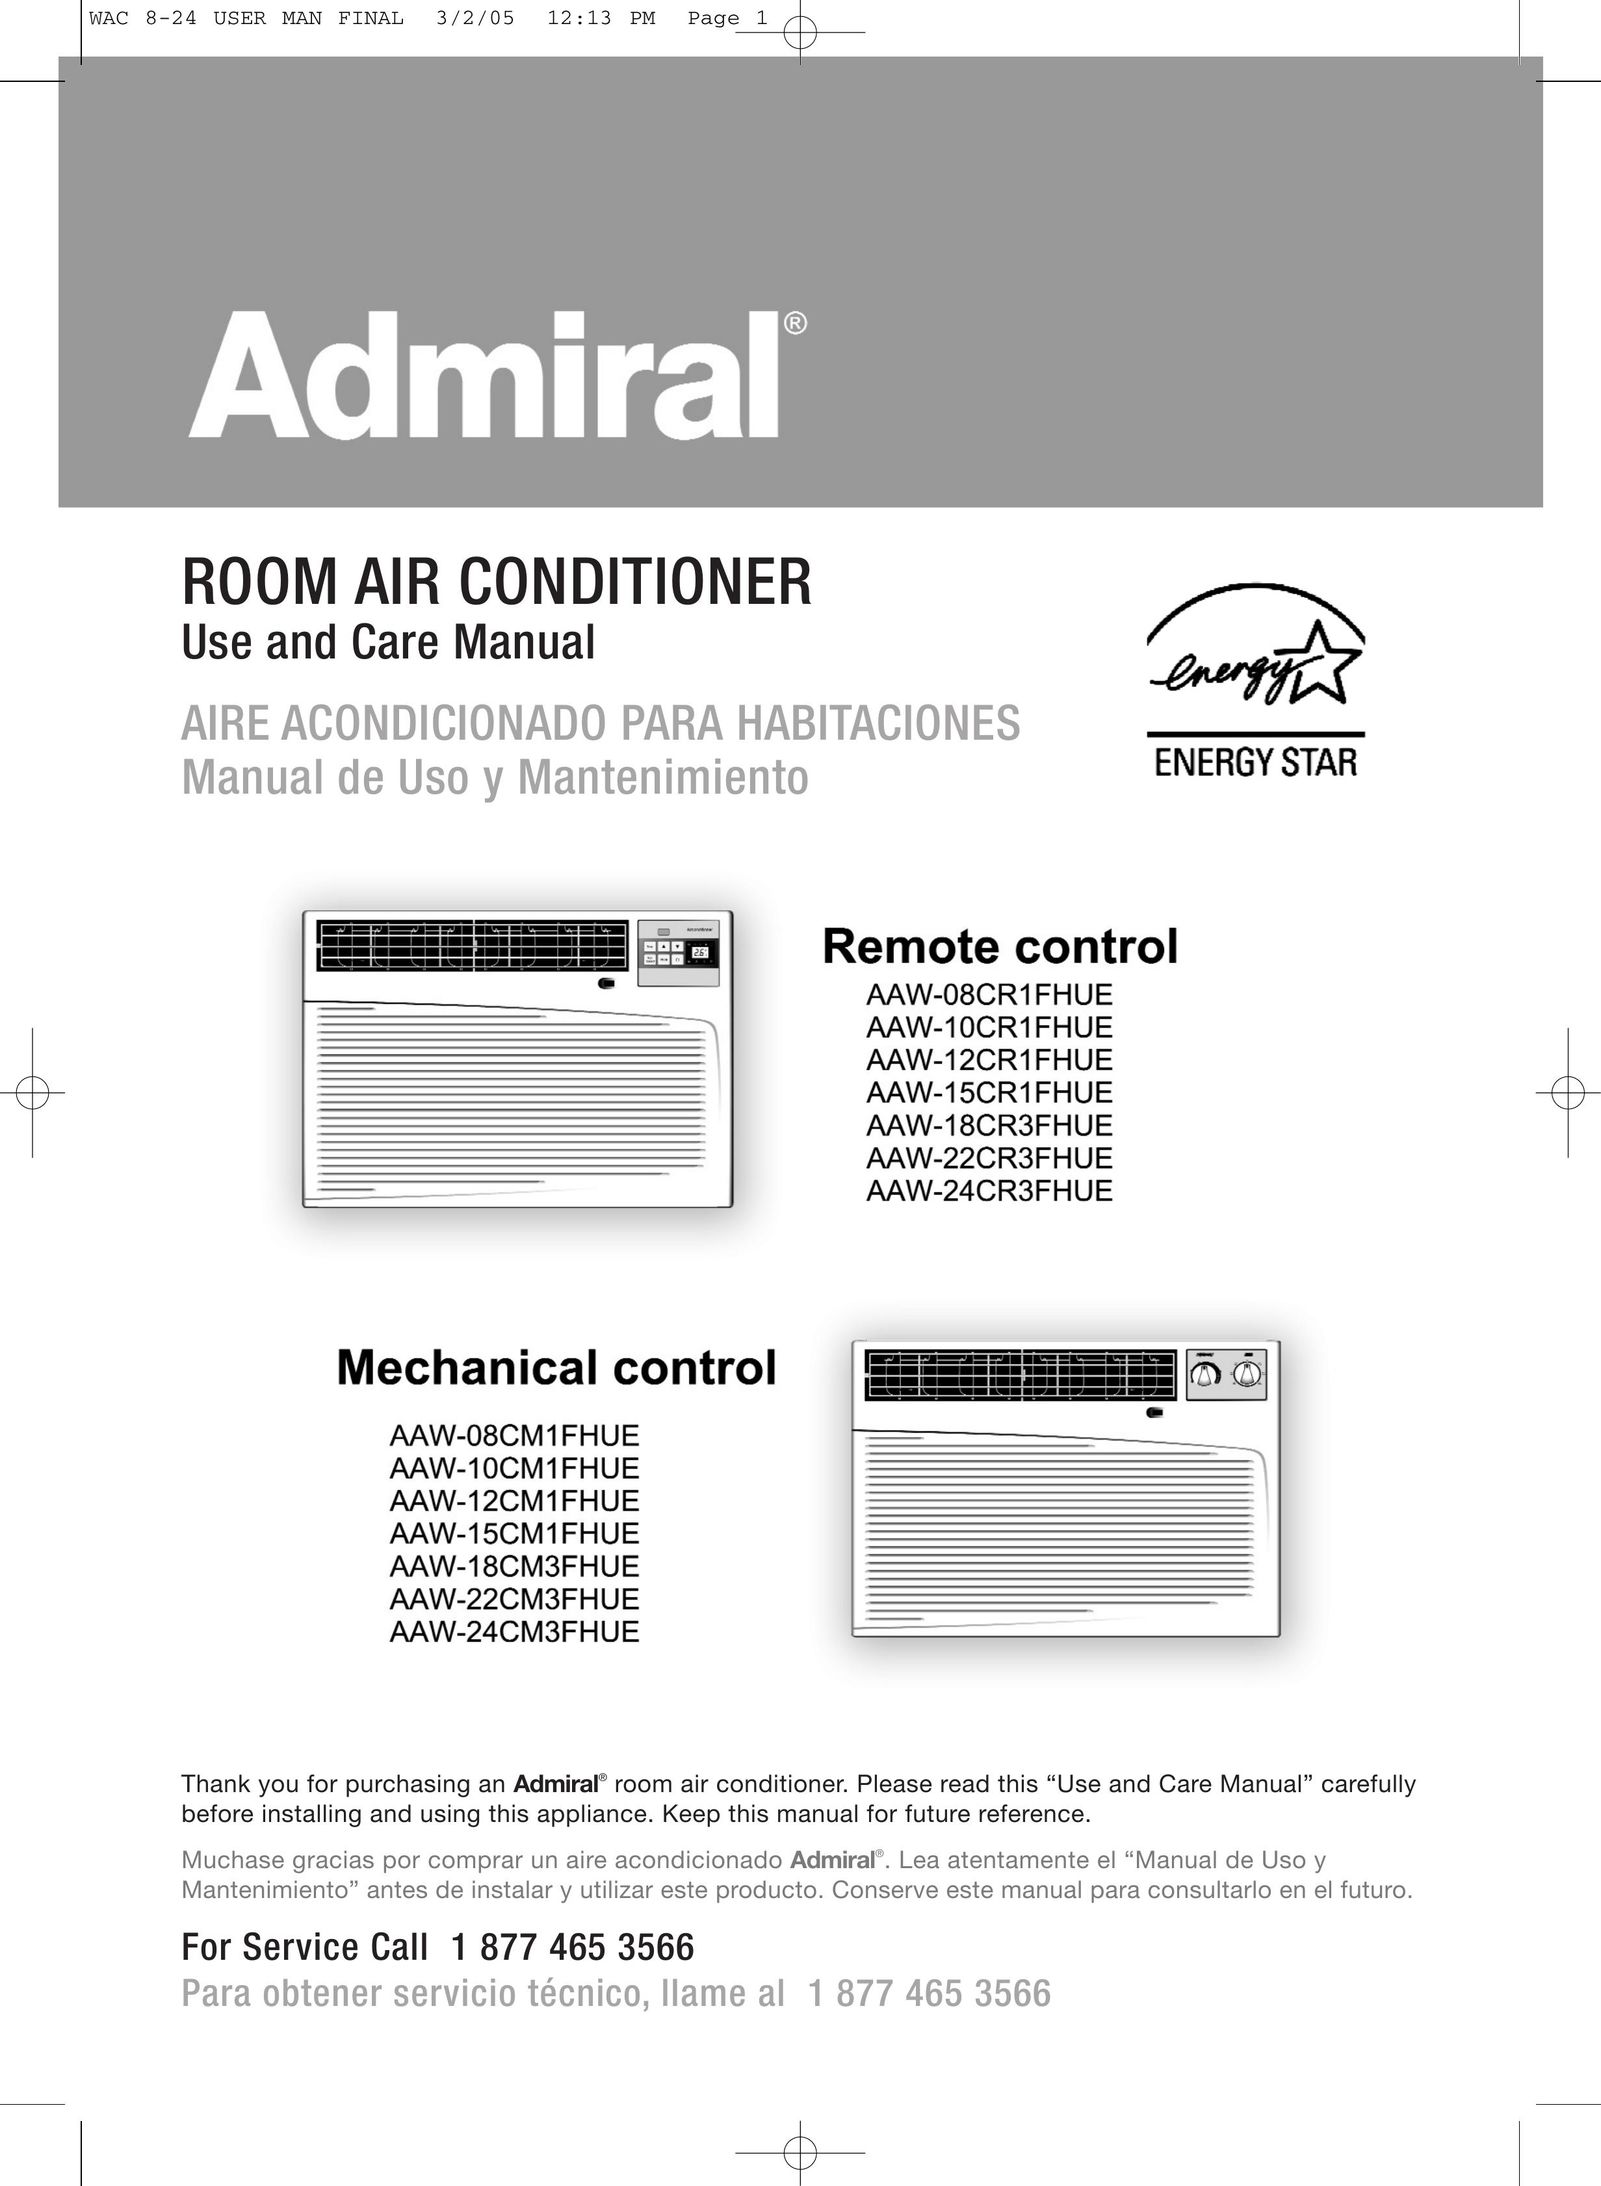 Admiral AAW-10CM1FHUE Air Conditioner User Manual